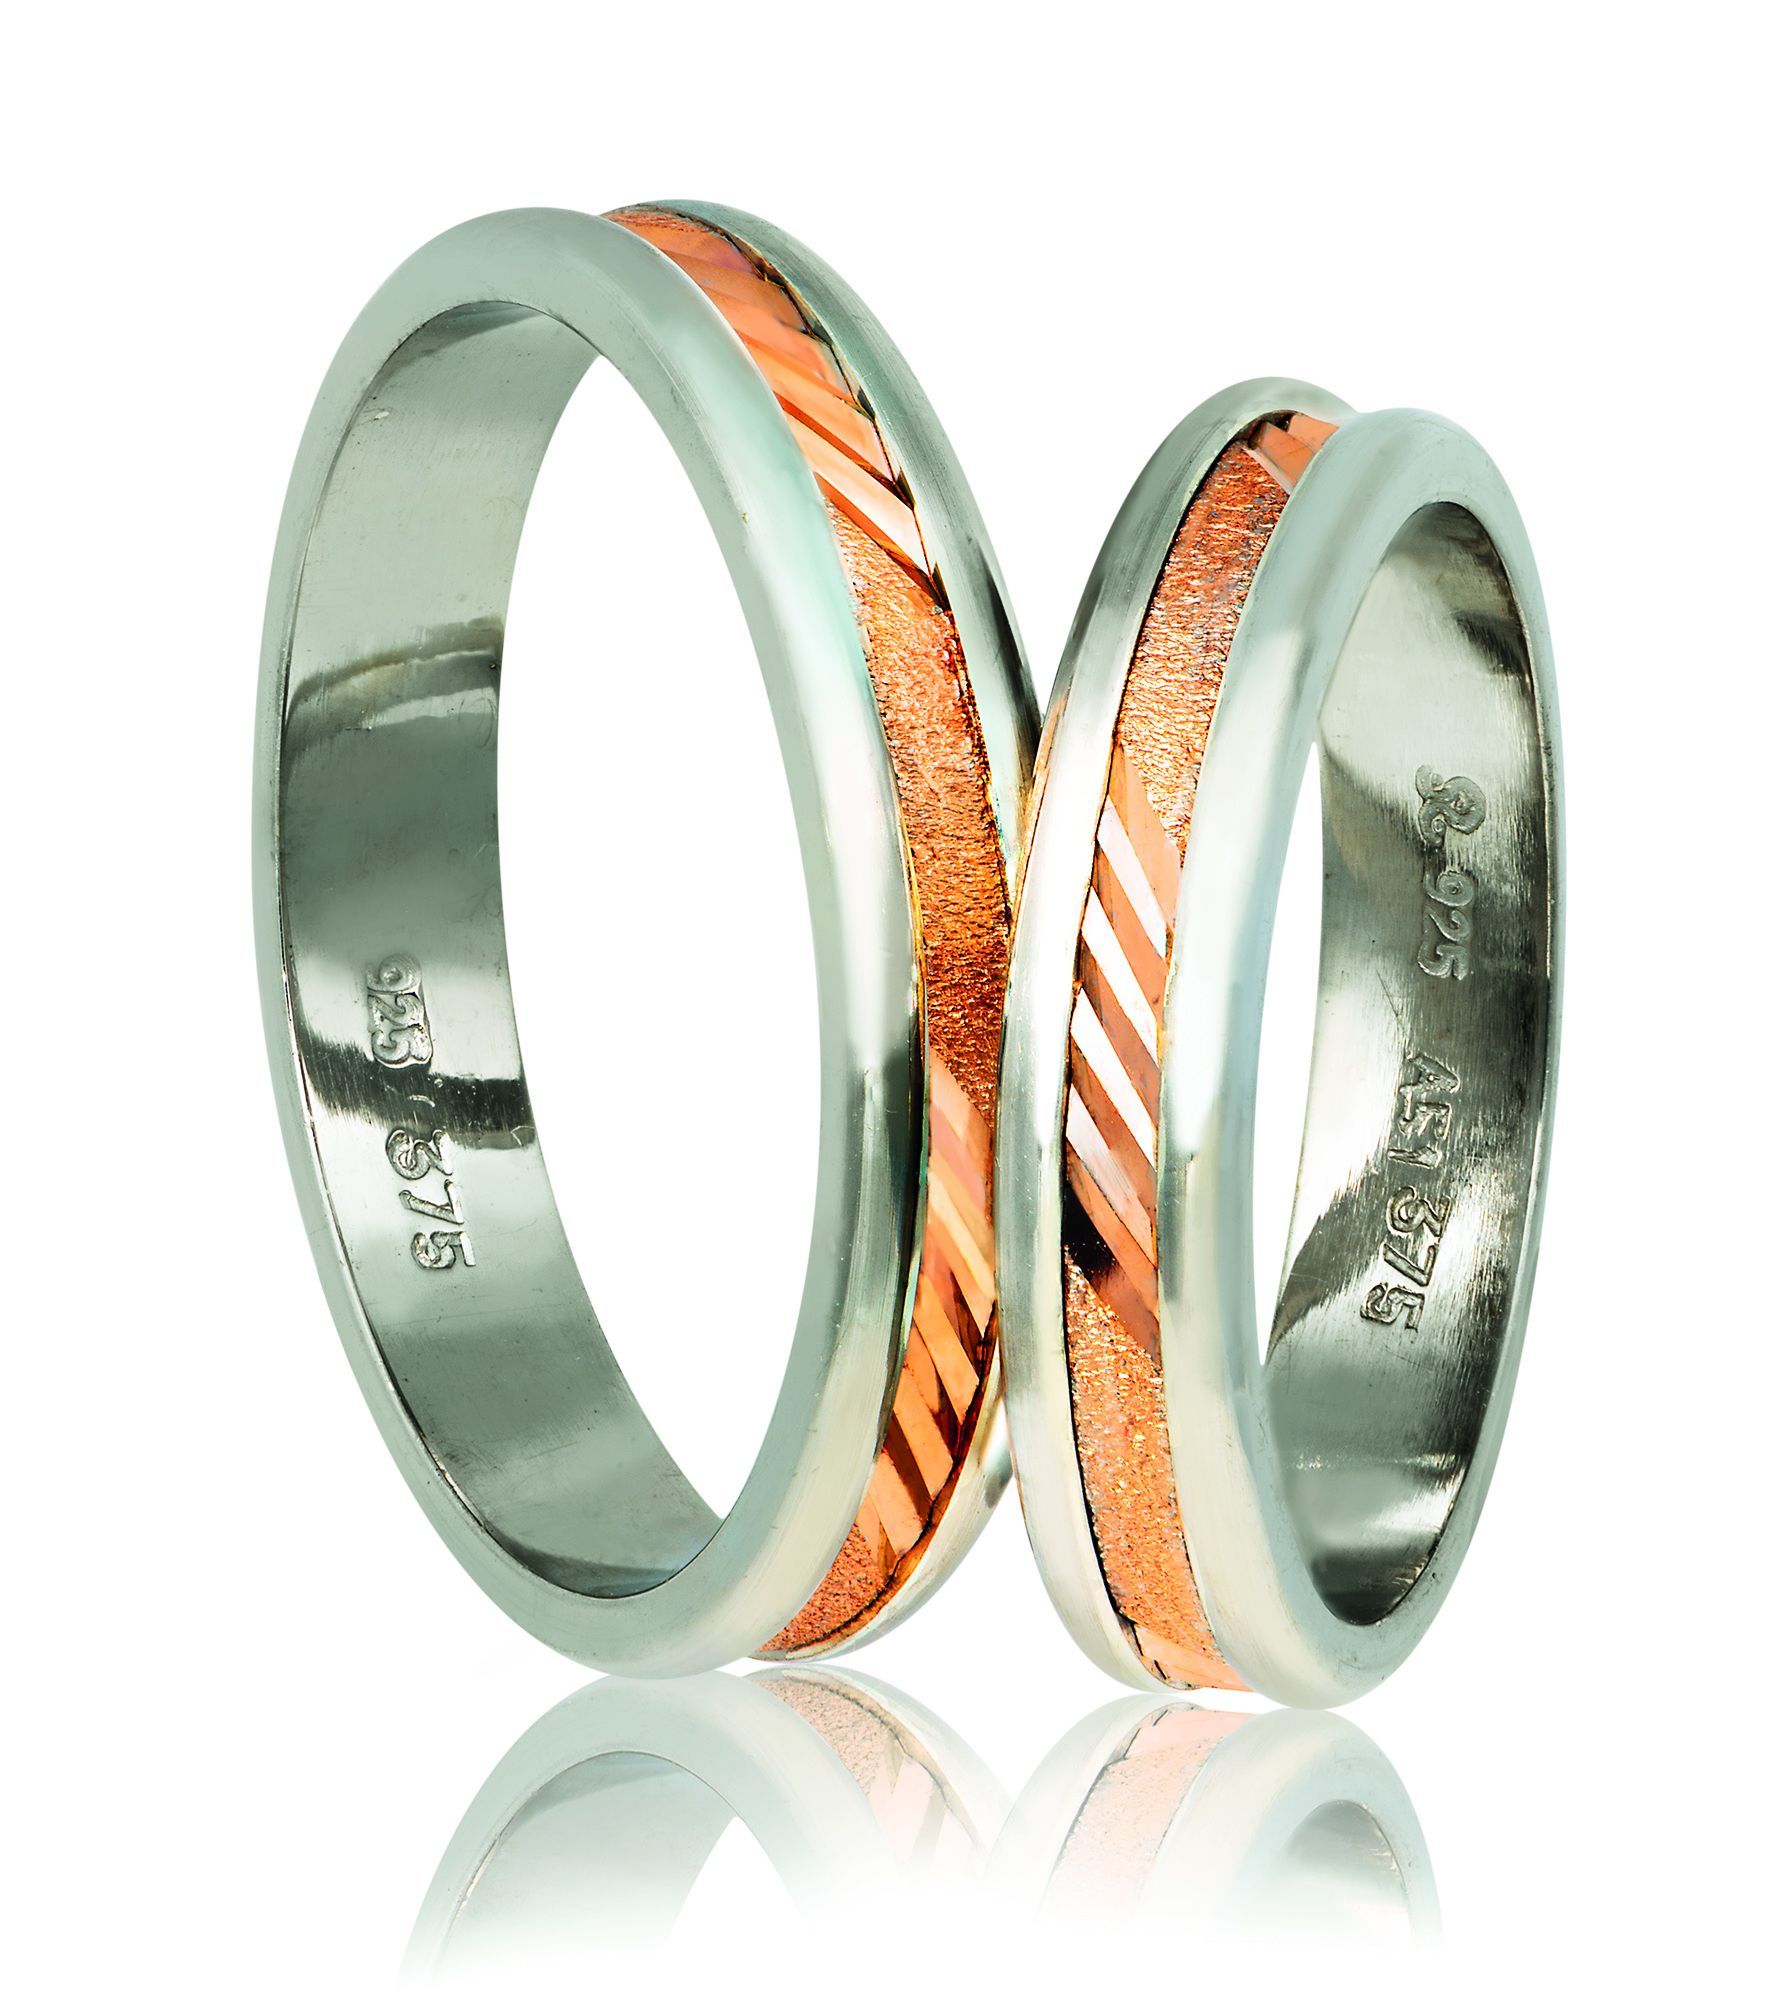 White gold & rose gold wedding rings 4.3mm(code A343r)